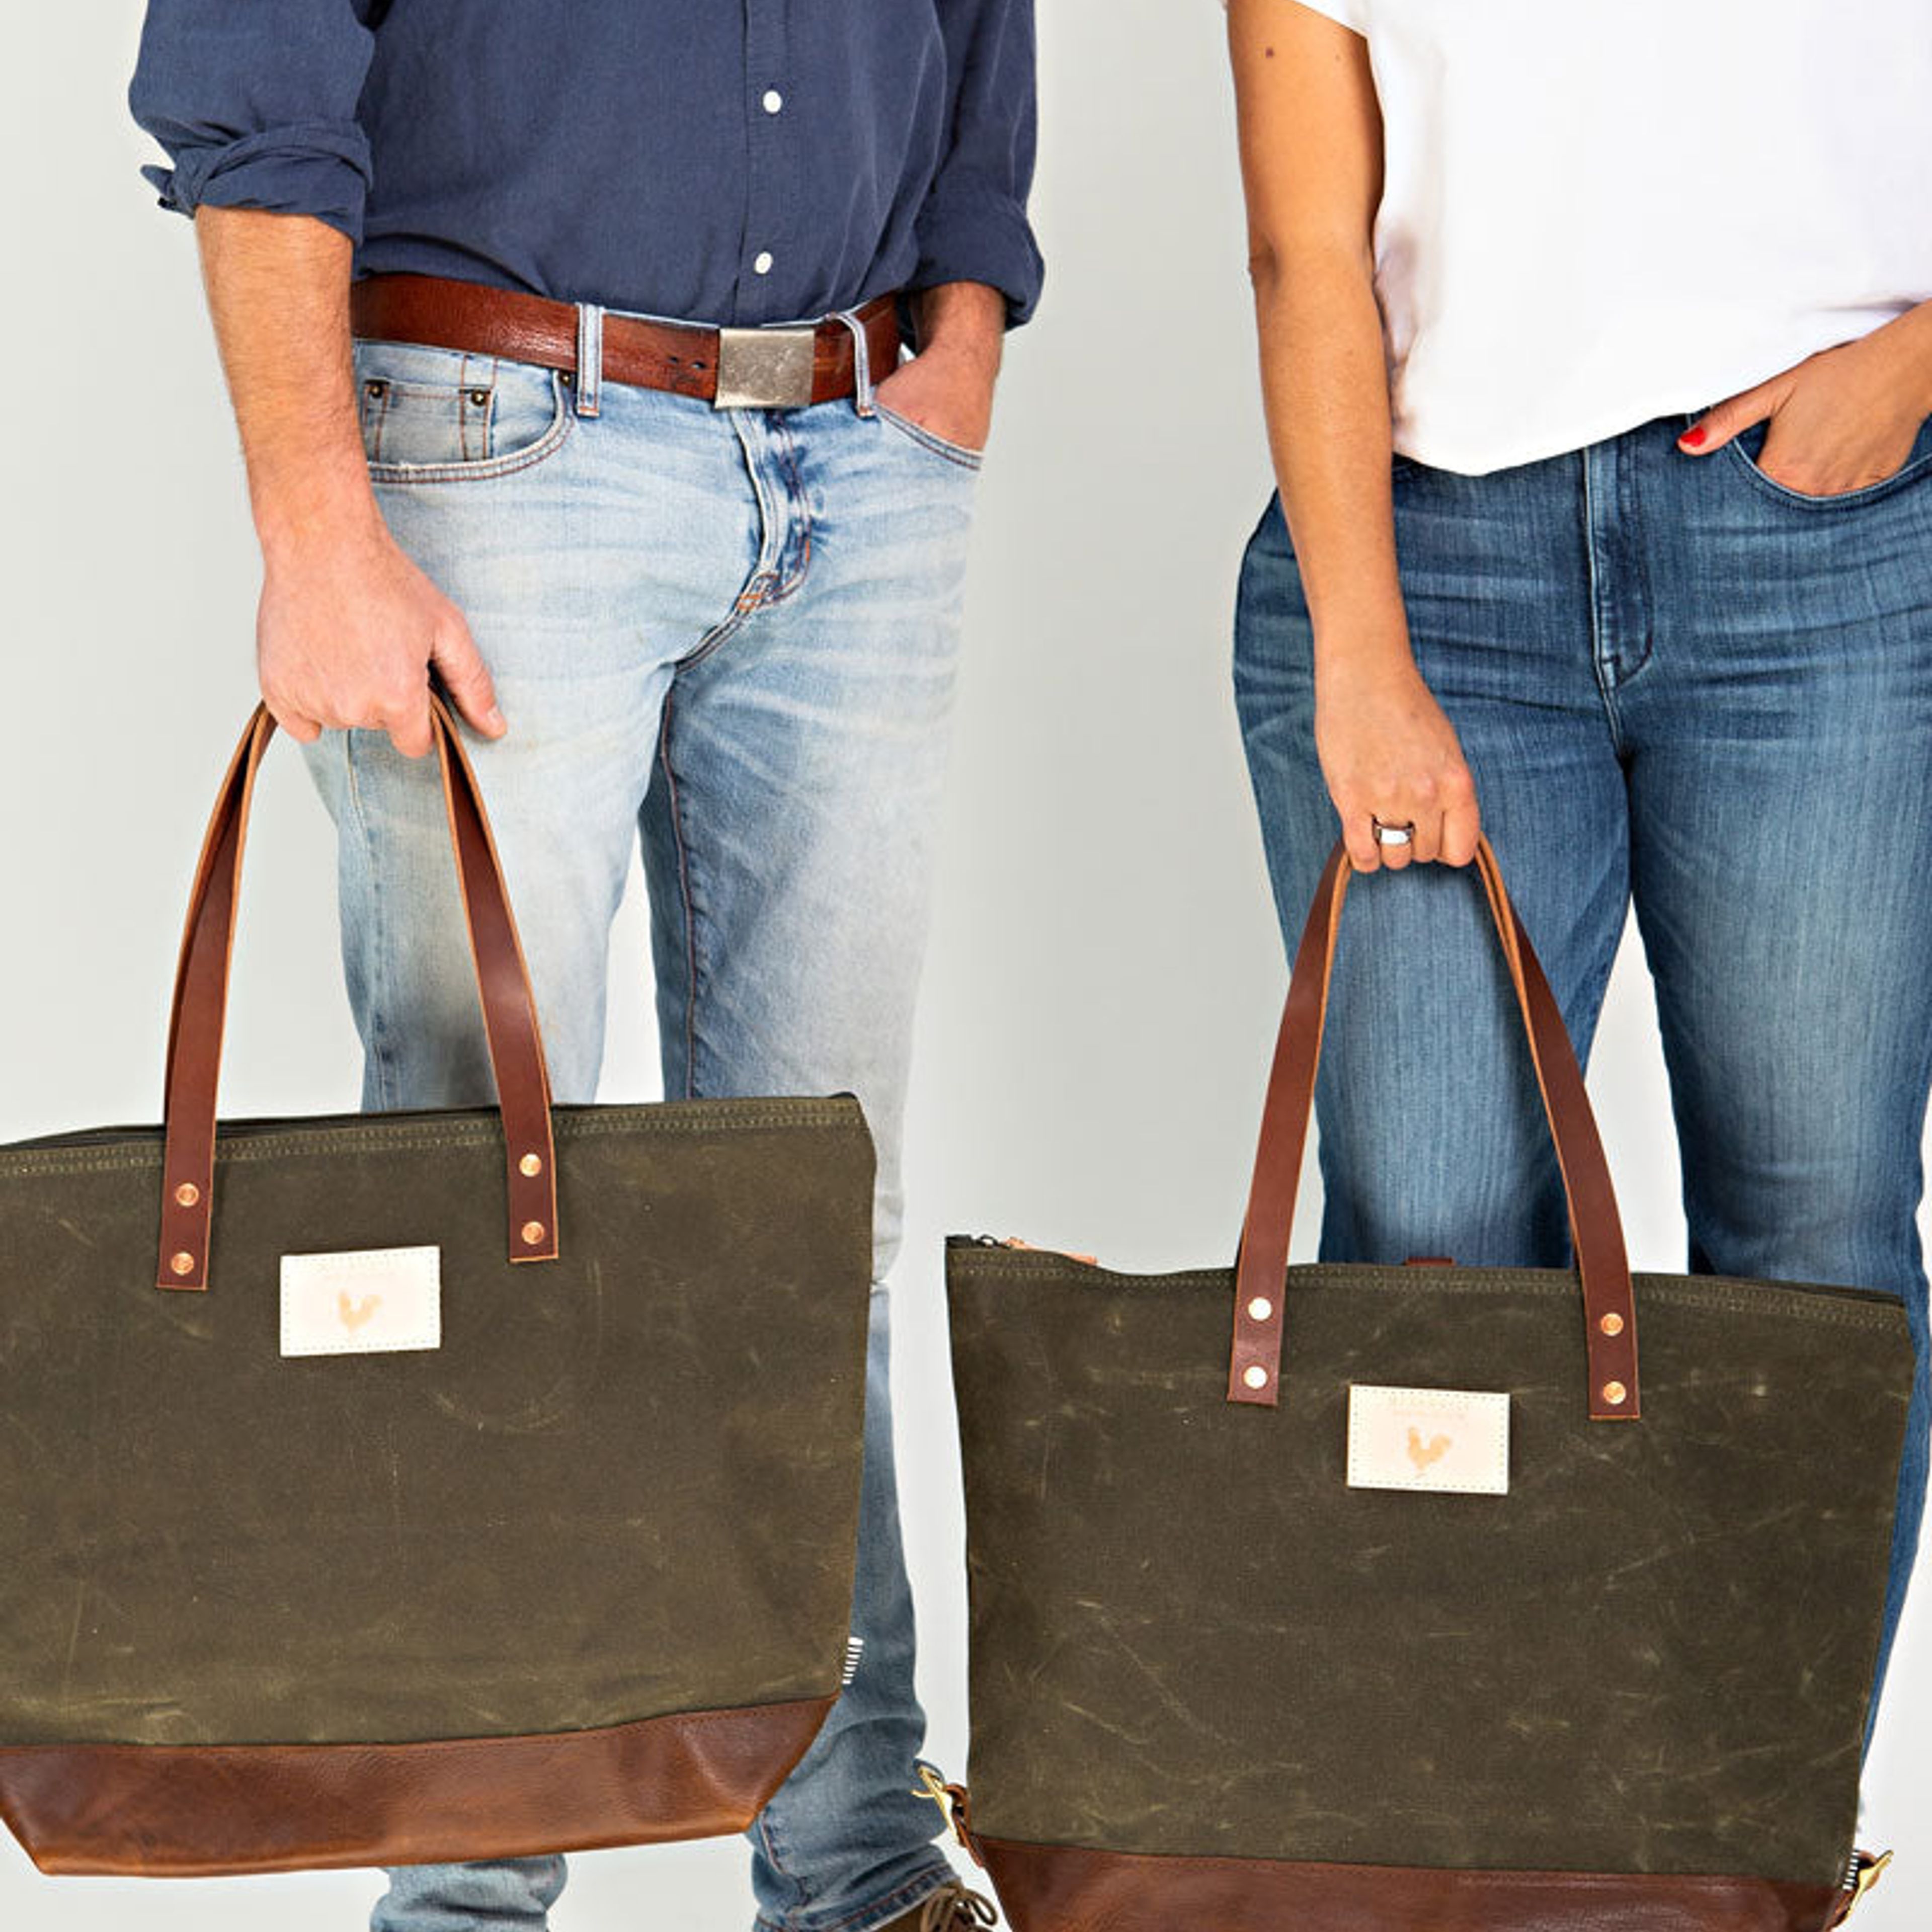 Olive Waxed Canvas Adventure Tote